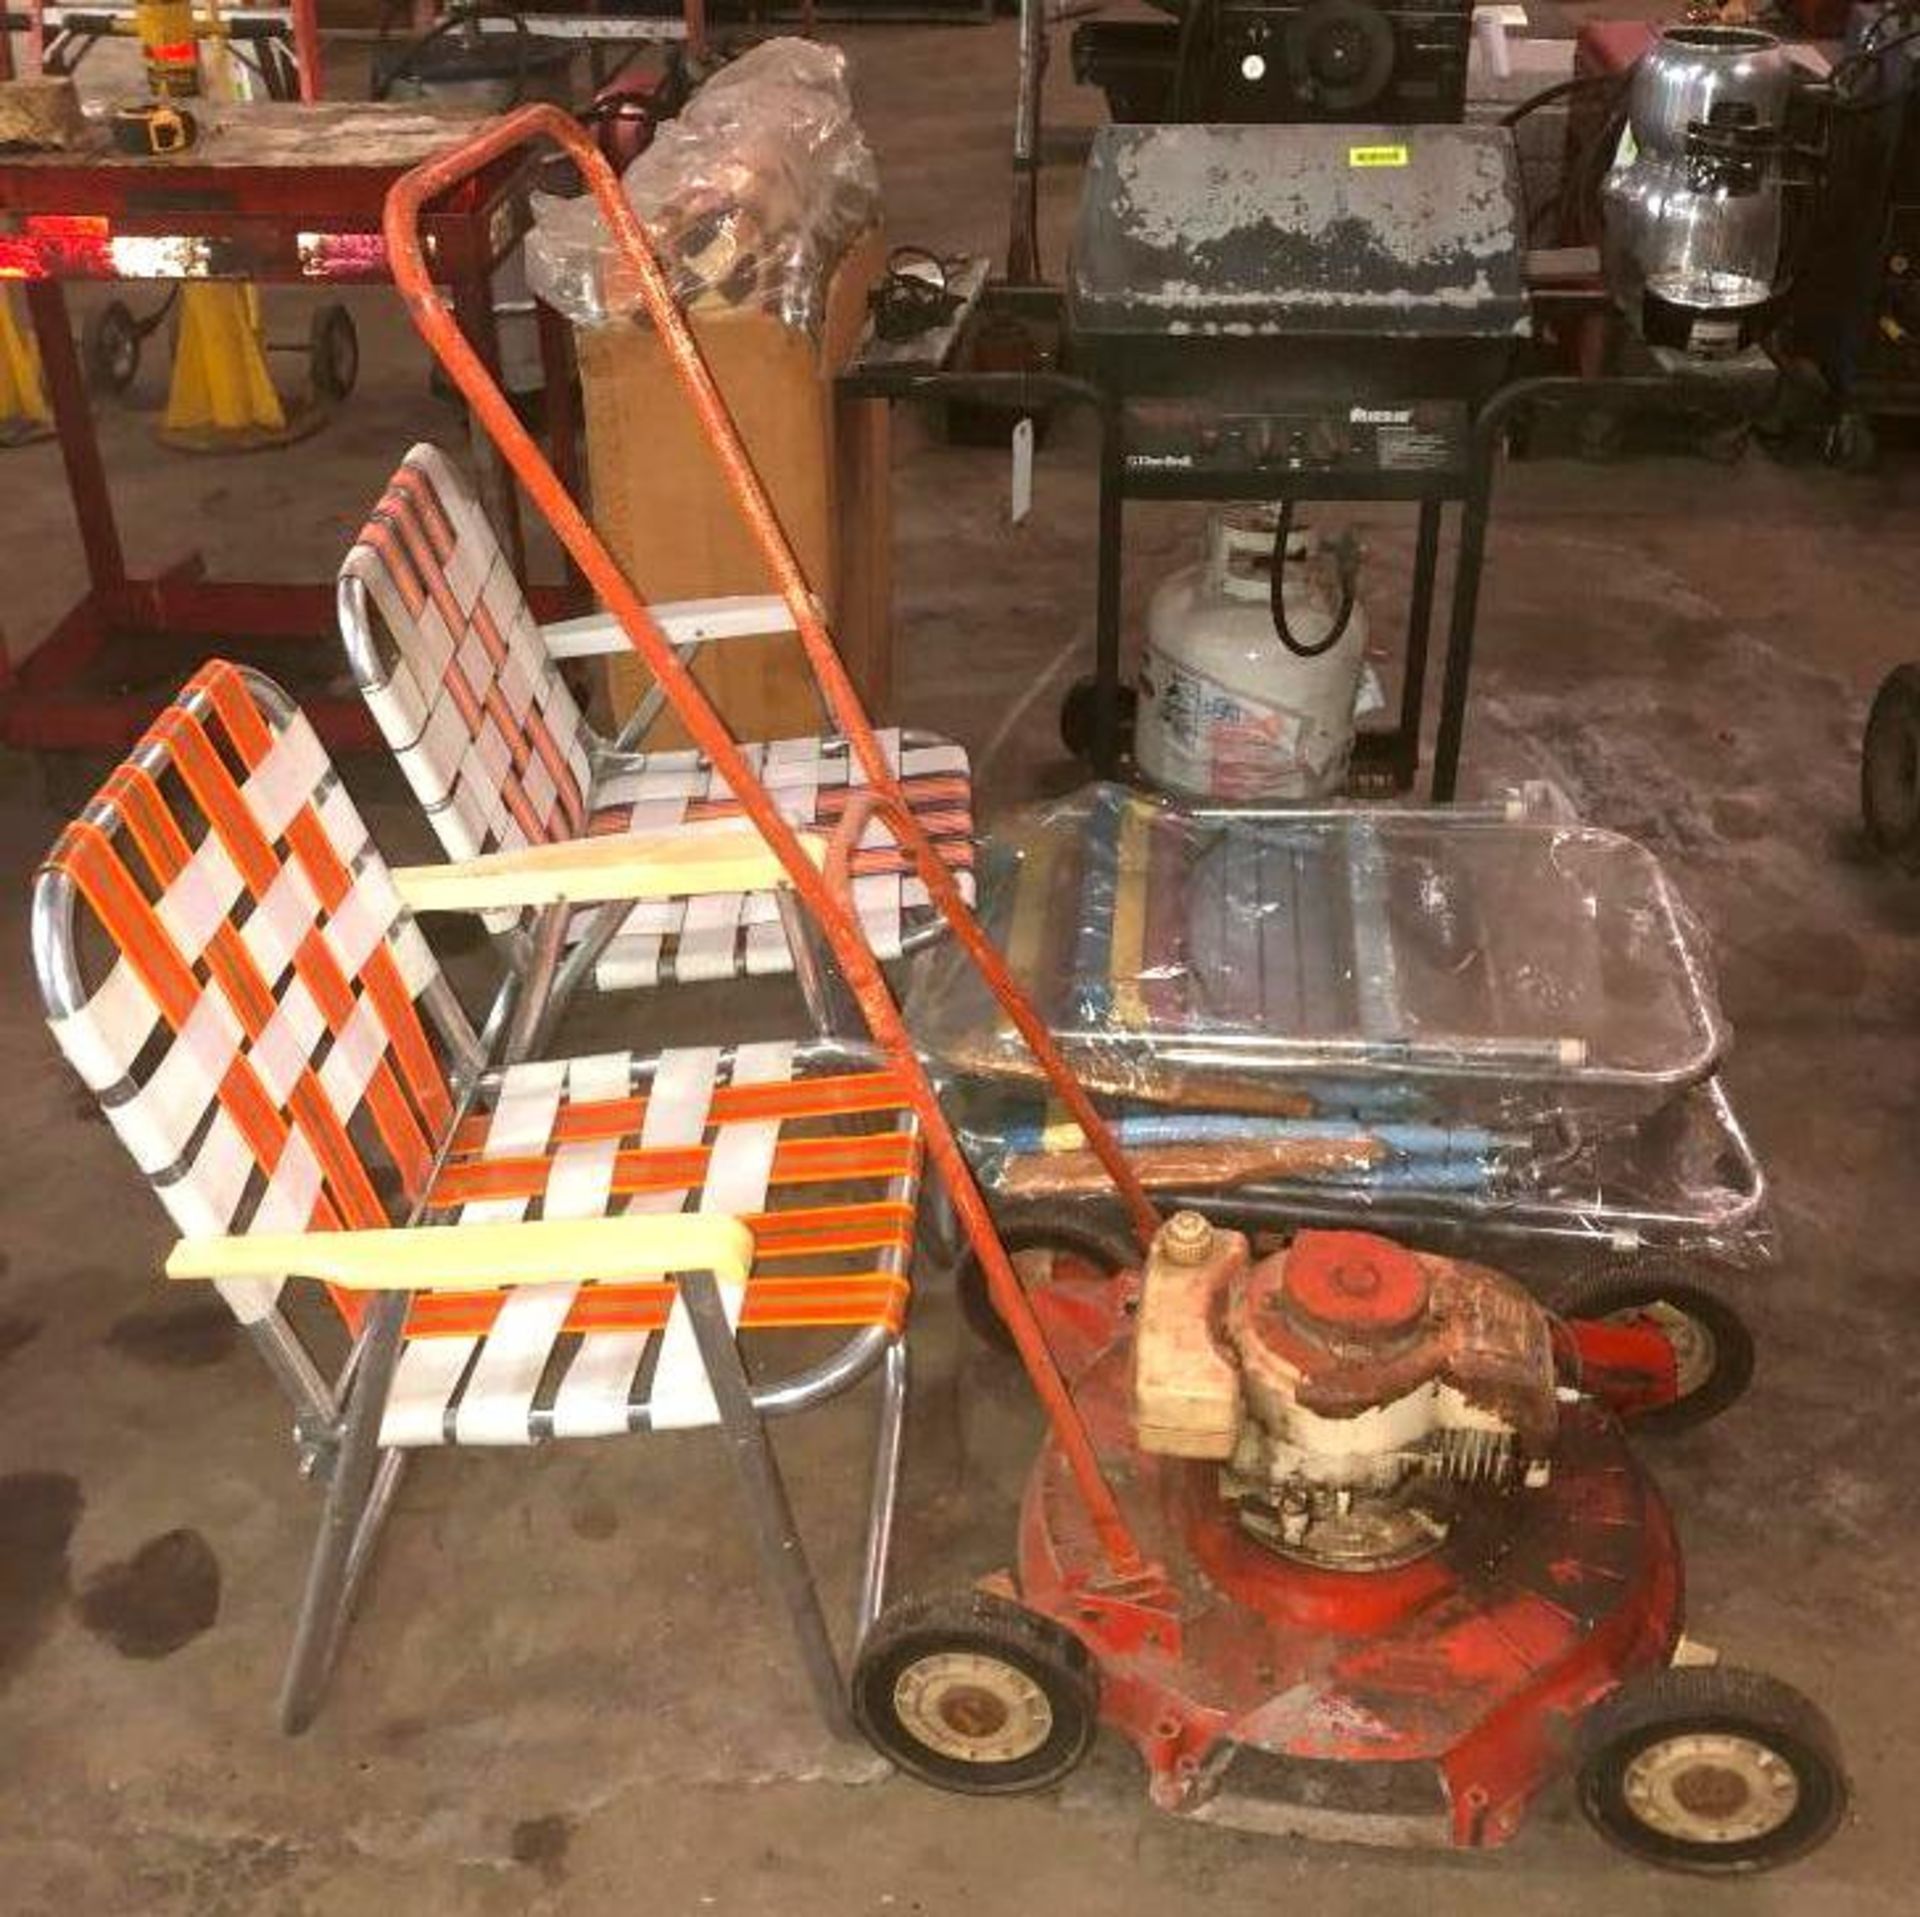 DESCRIPTION ASSORTED OUTDOOR PACKAGE (LAWN MOWER, GRILL, LAWN CHAIRS, ETC.) THIS LOT IS ONE MONEY QU